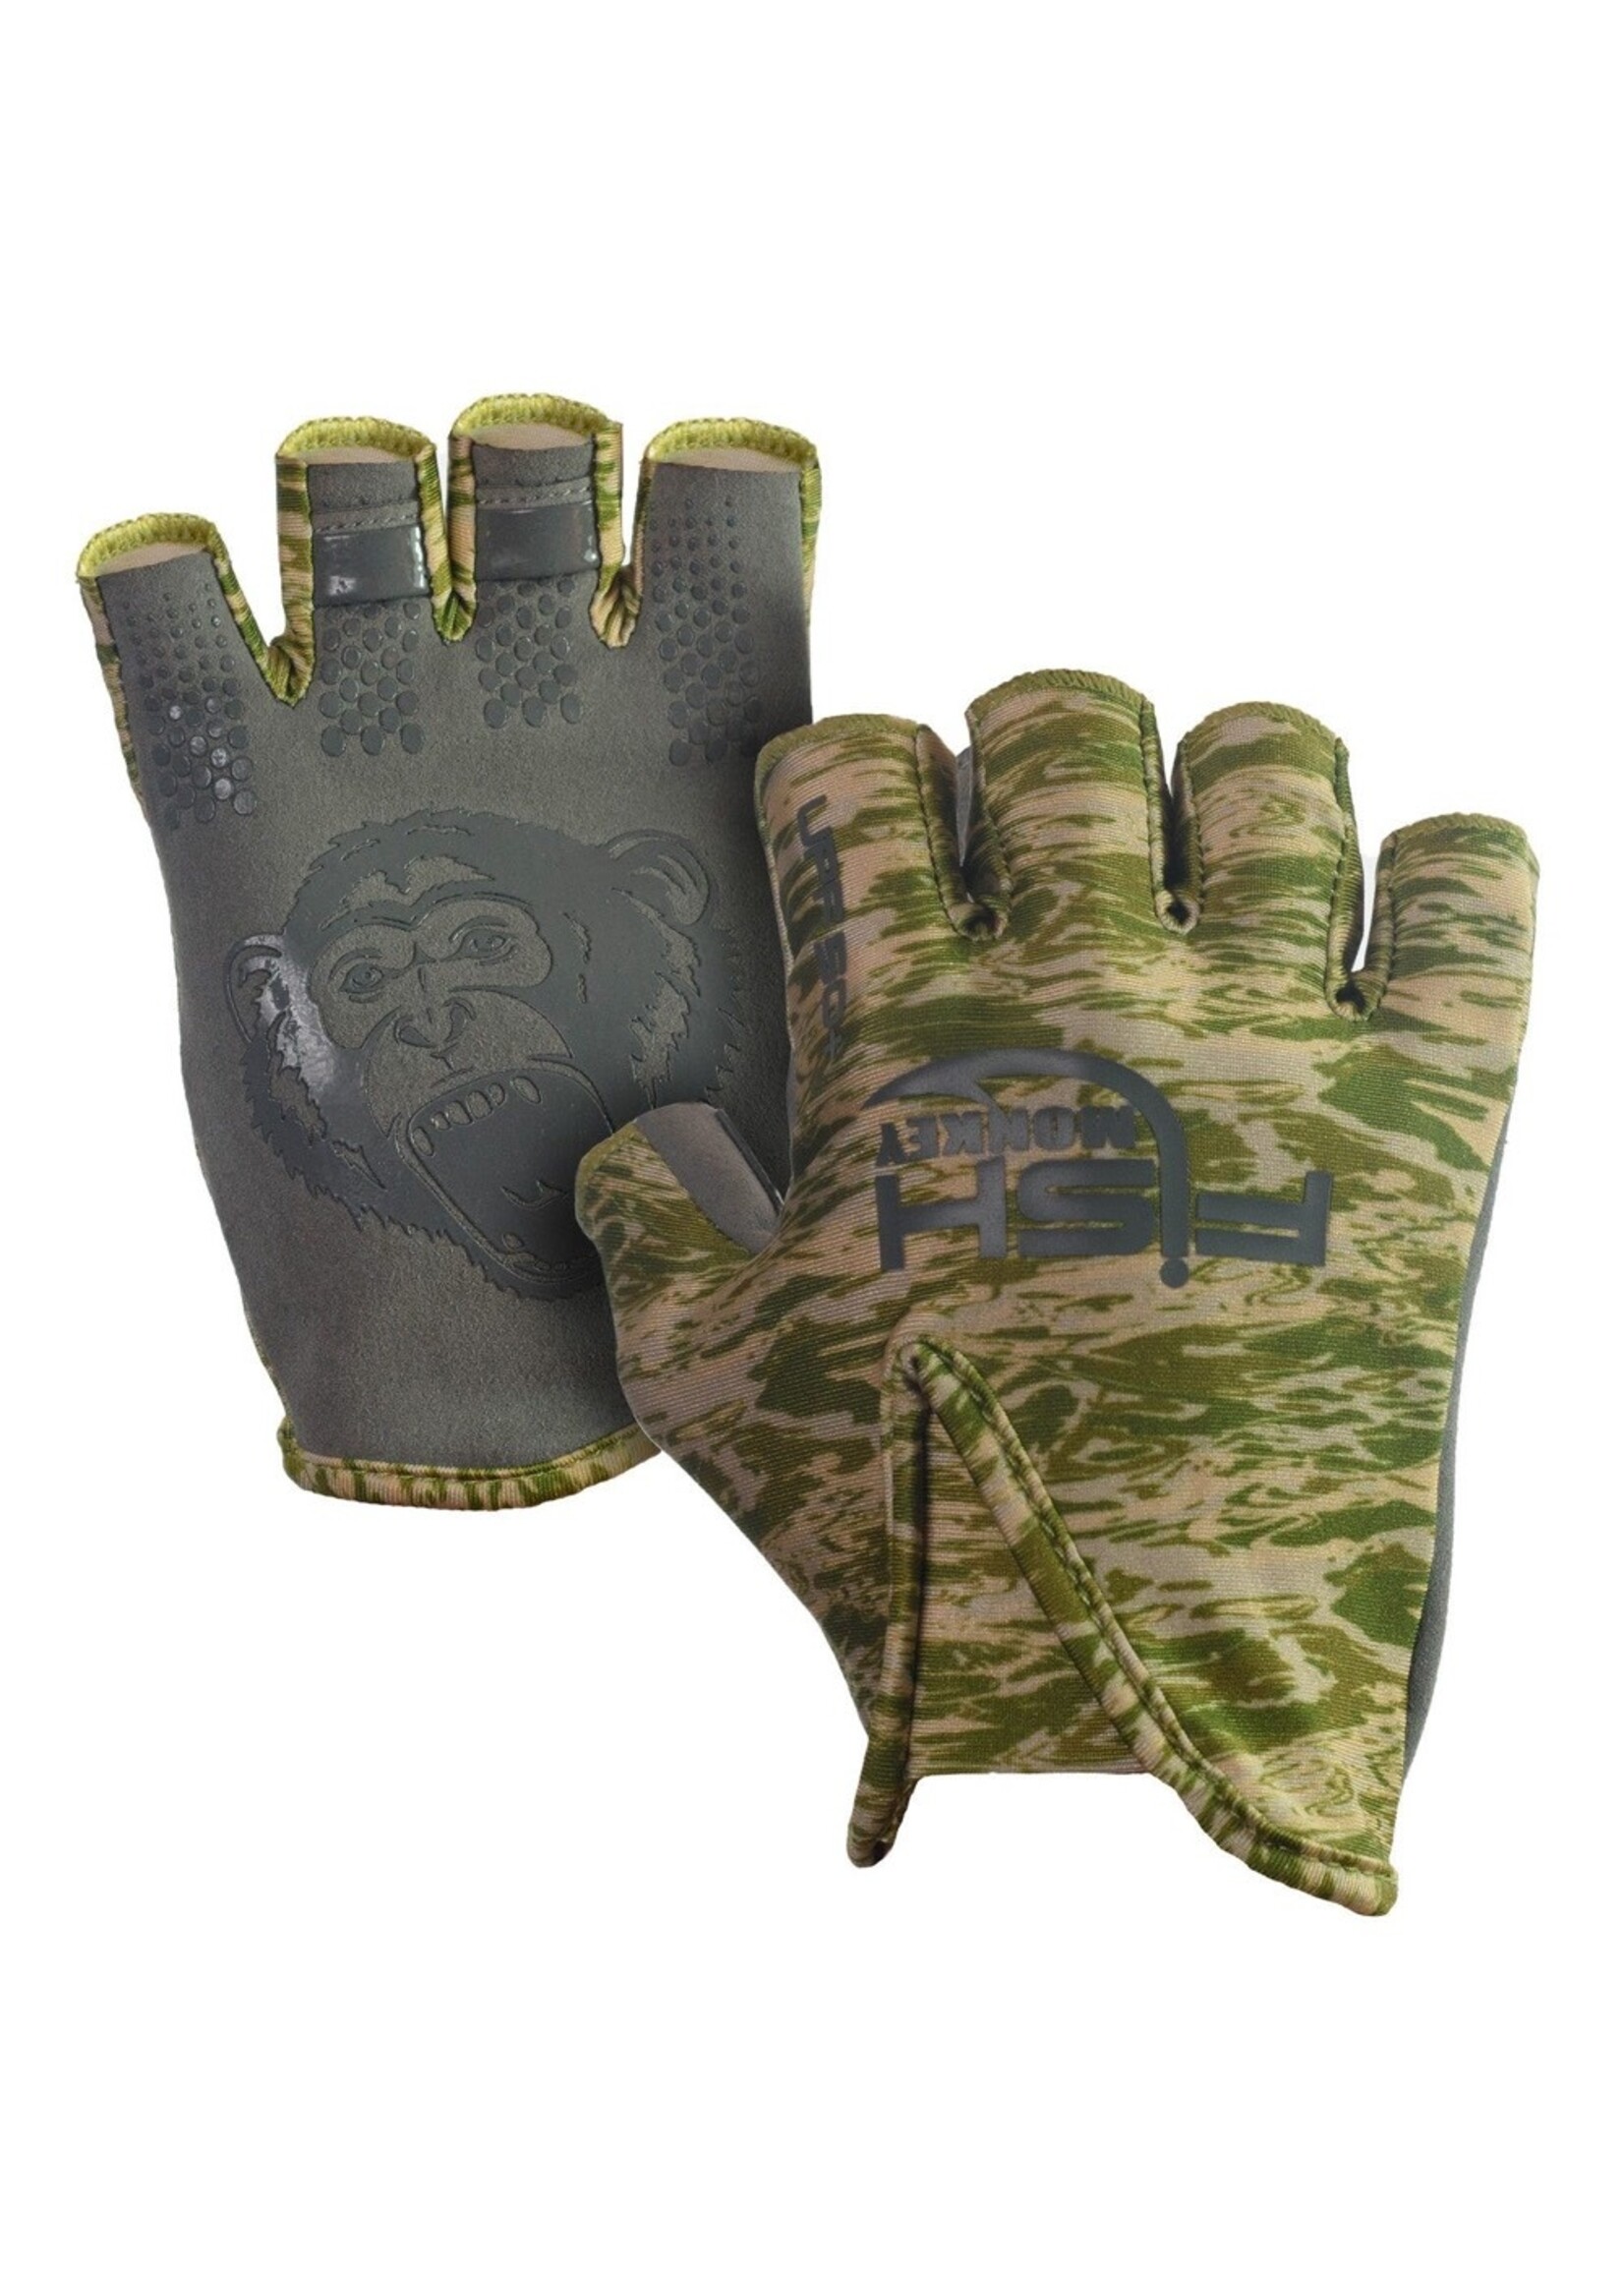 Fish Monkey Gloves Stubby Guide Gloves, X-Large, Grey Water Camo :  : Sports, Fitness & Outdoors